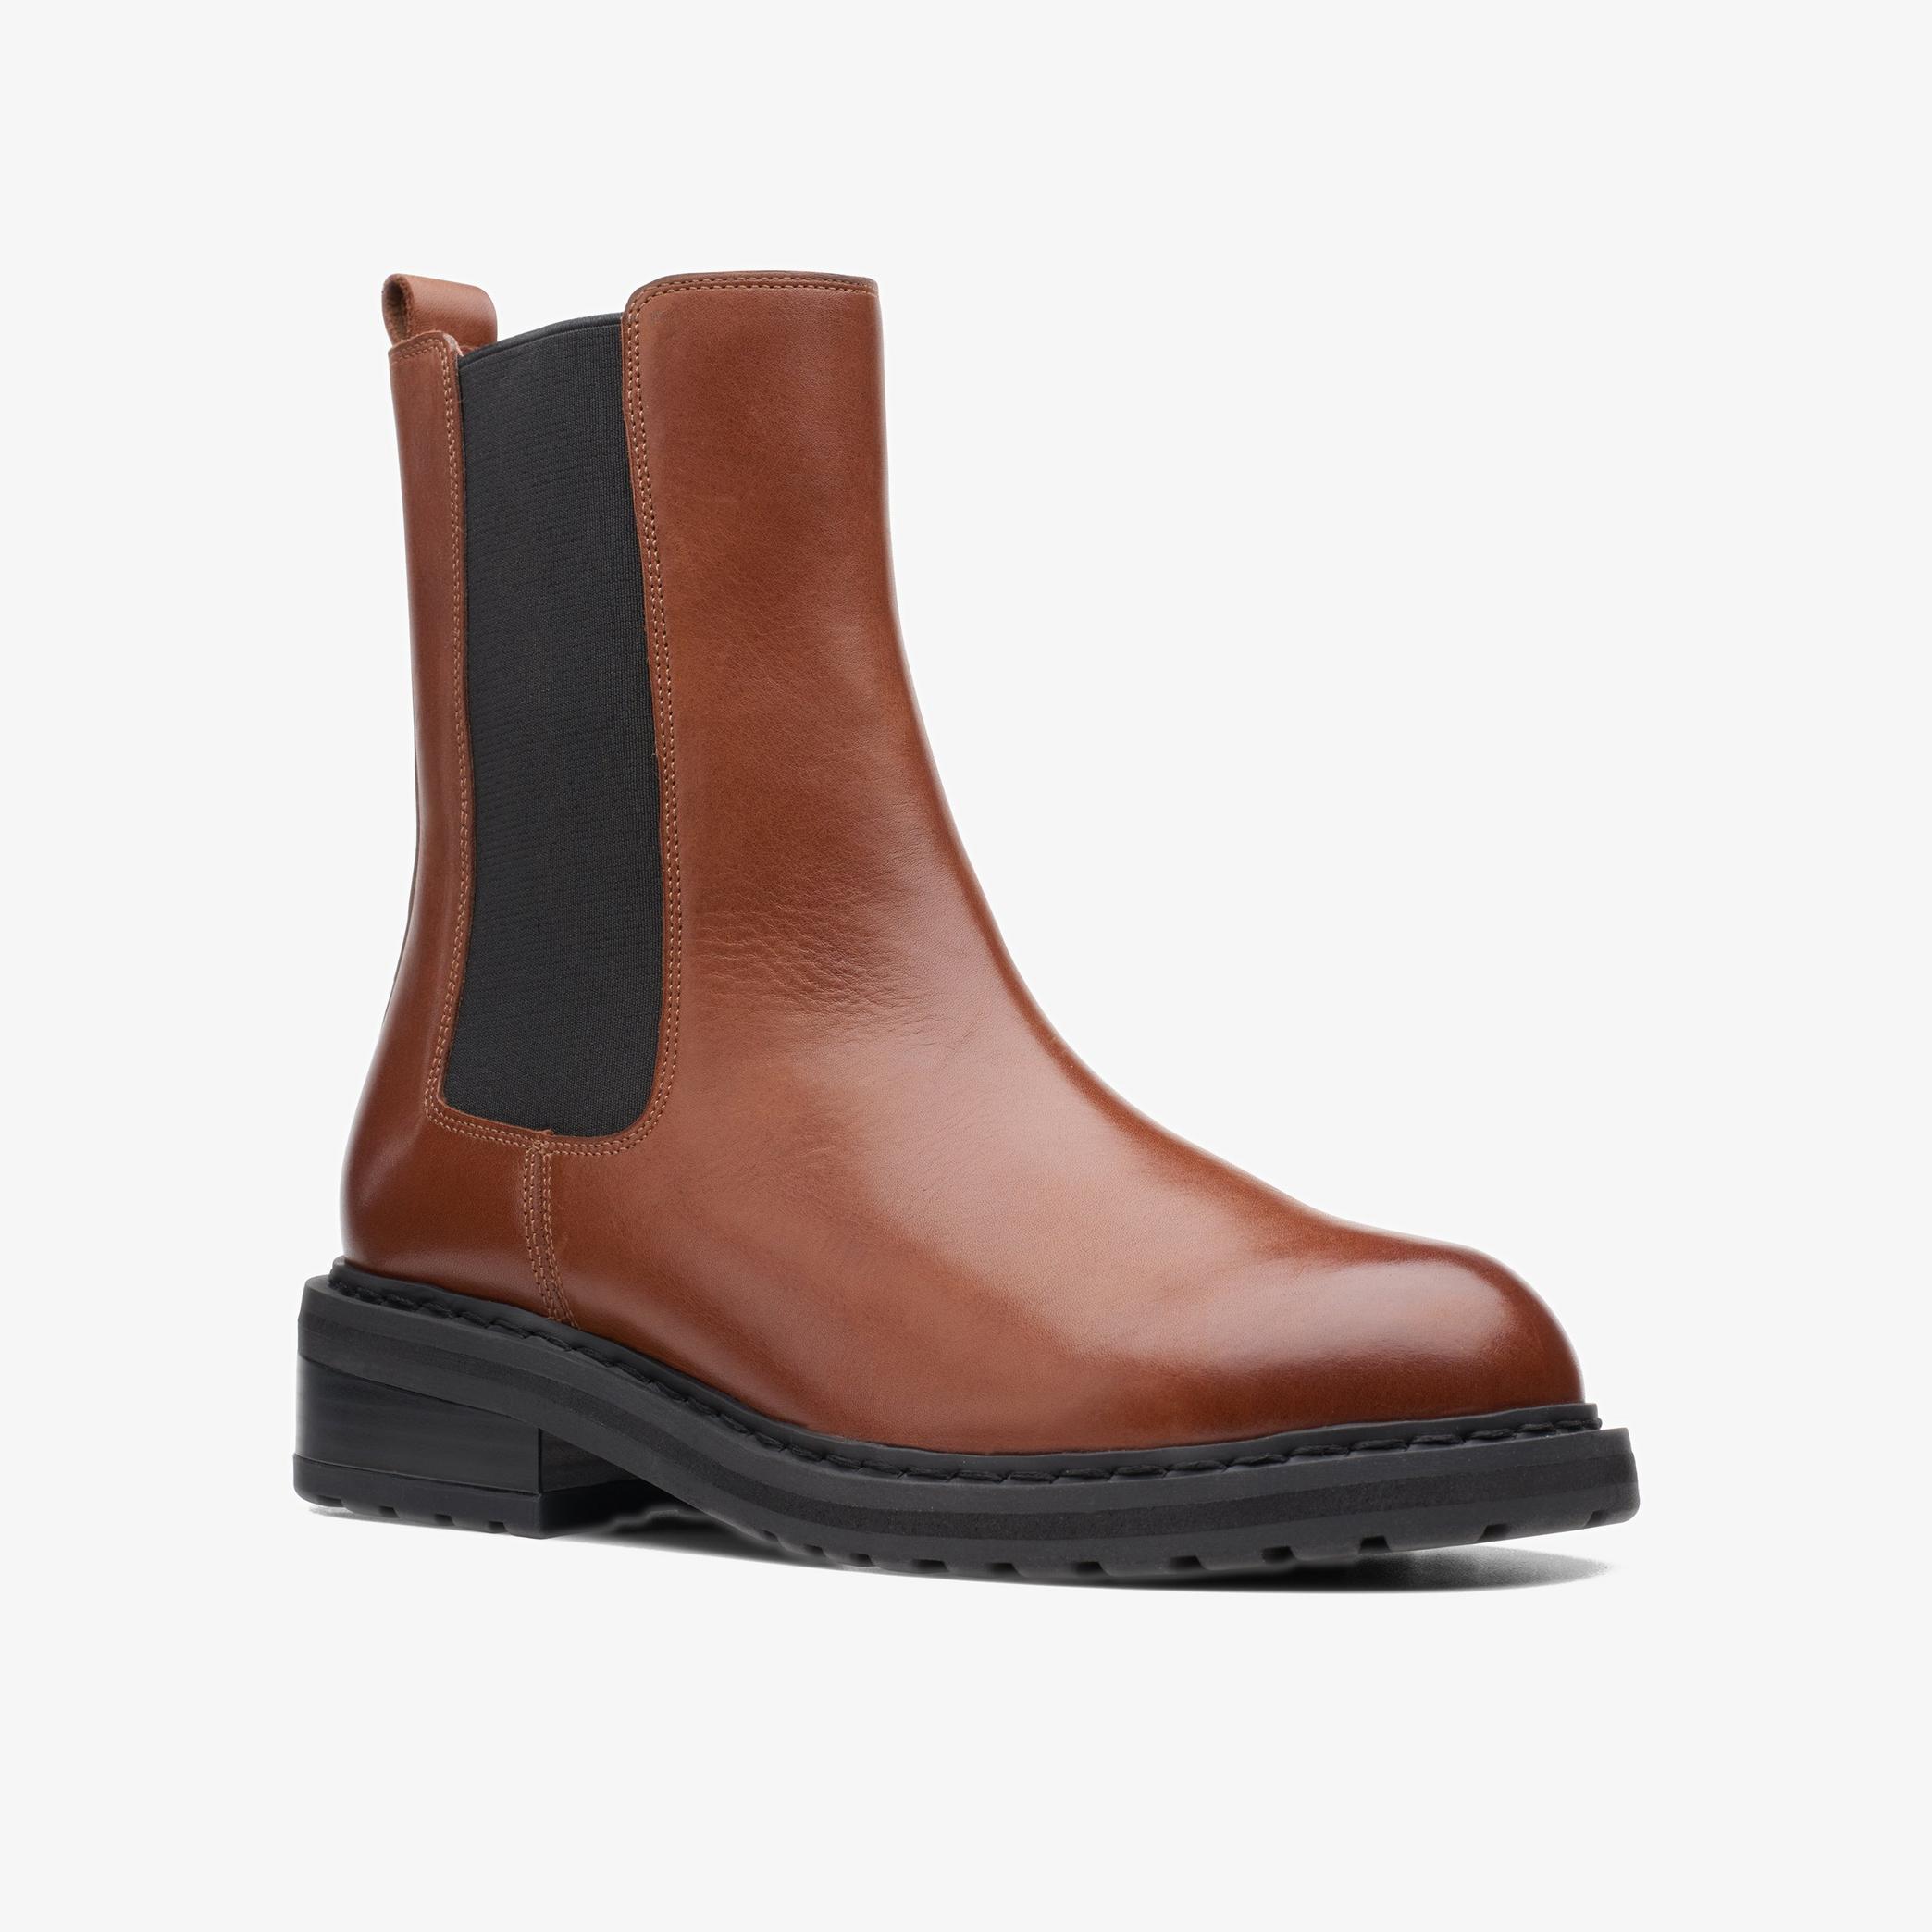 Tilham Chelsea Dark Tan Leather Ankle Boots, view 3 of 6